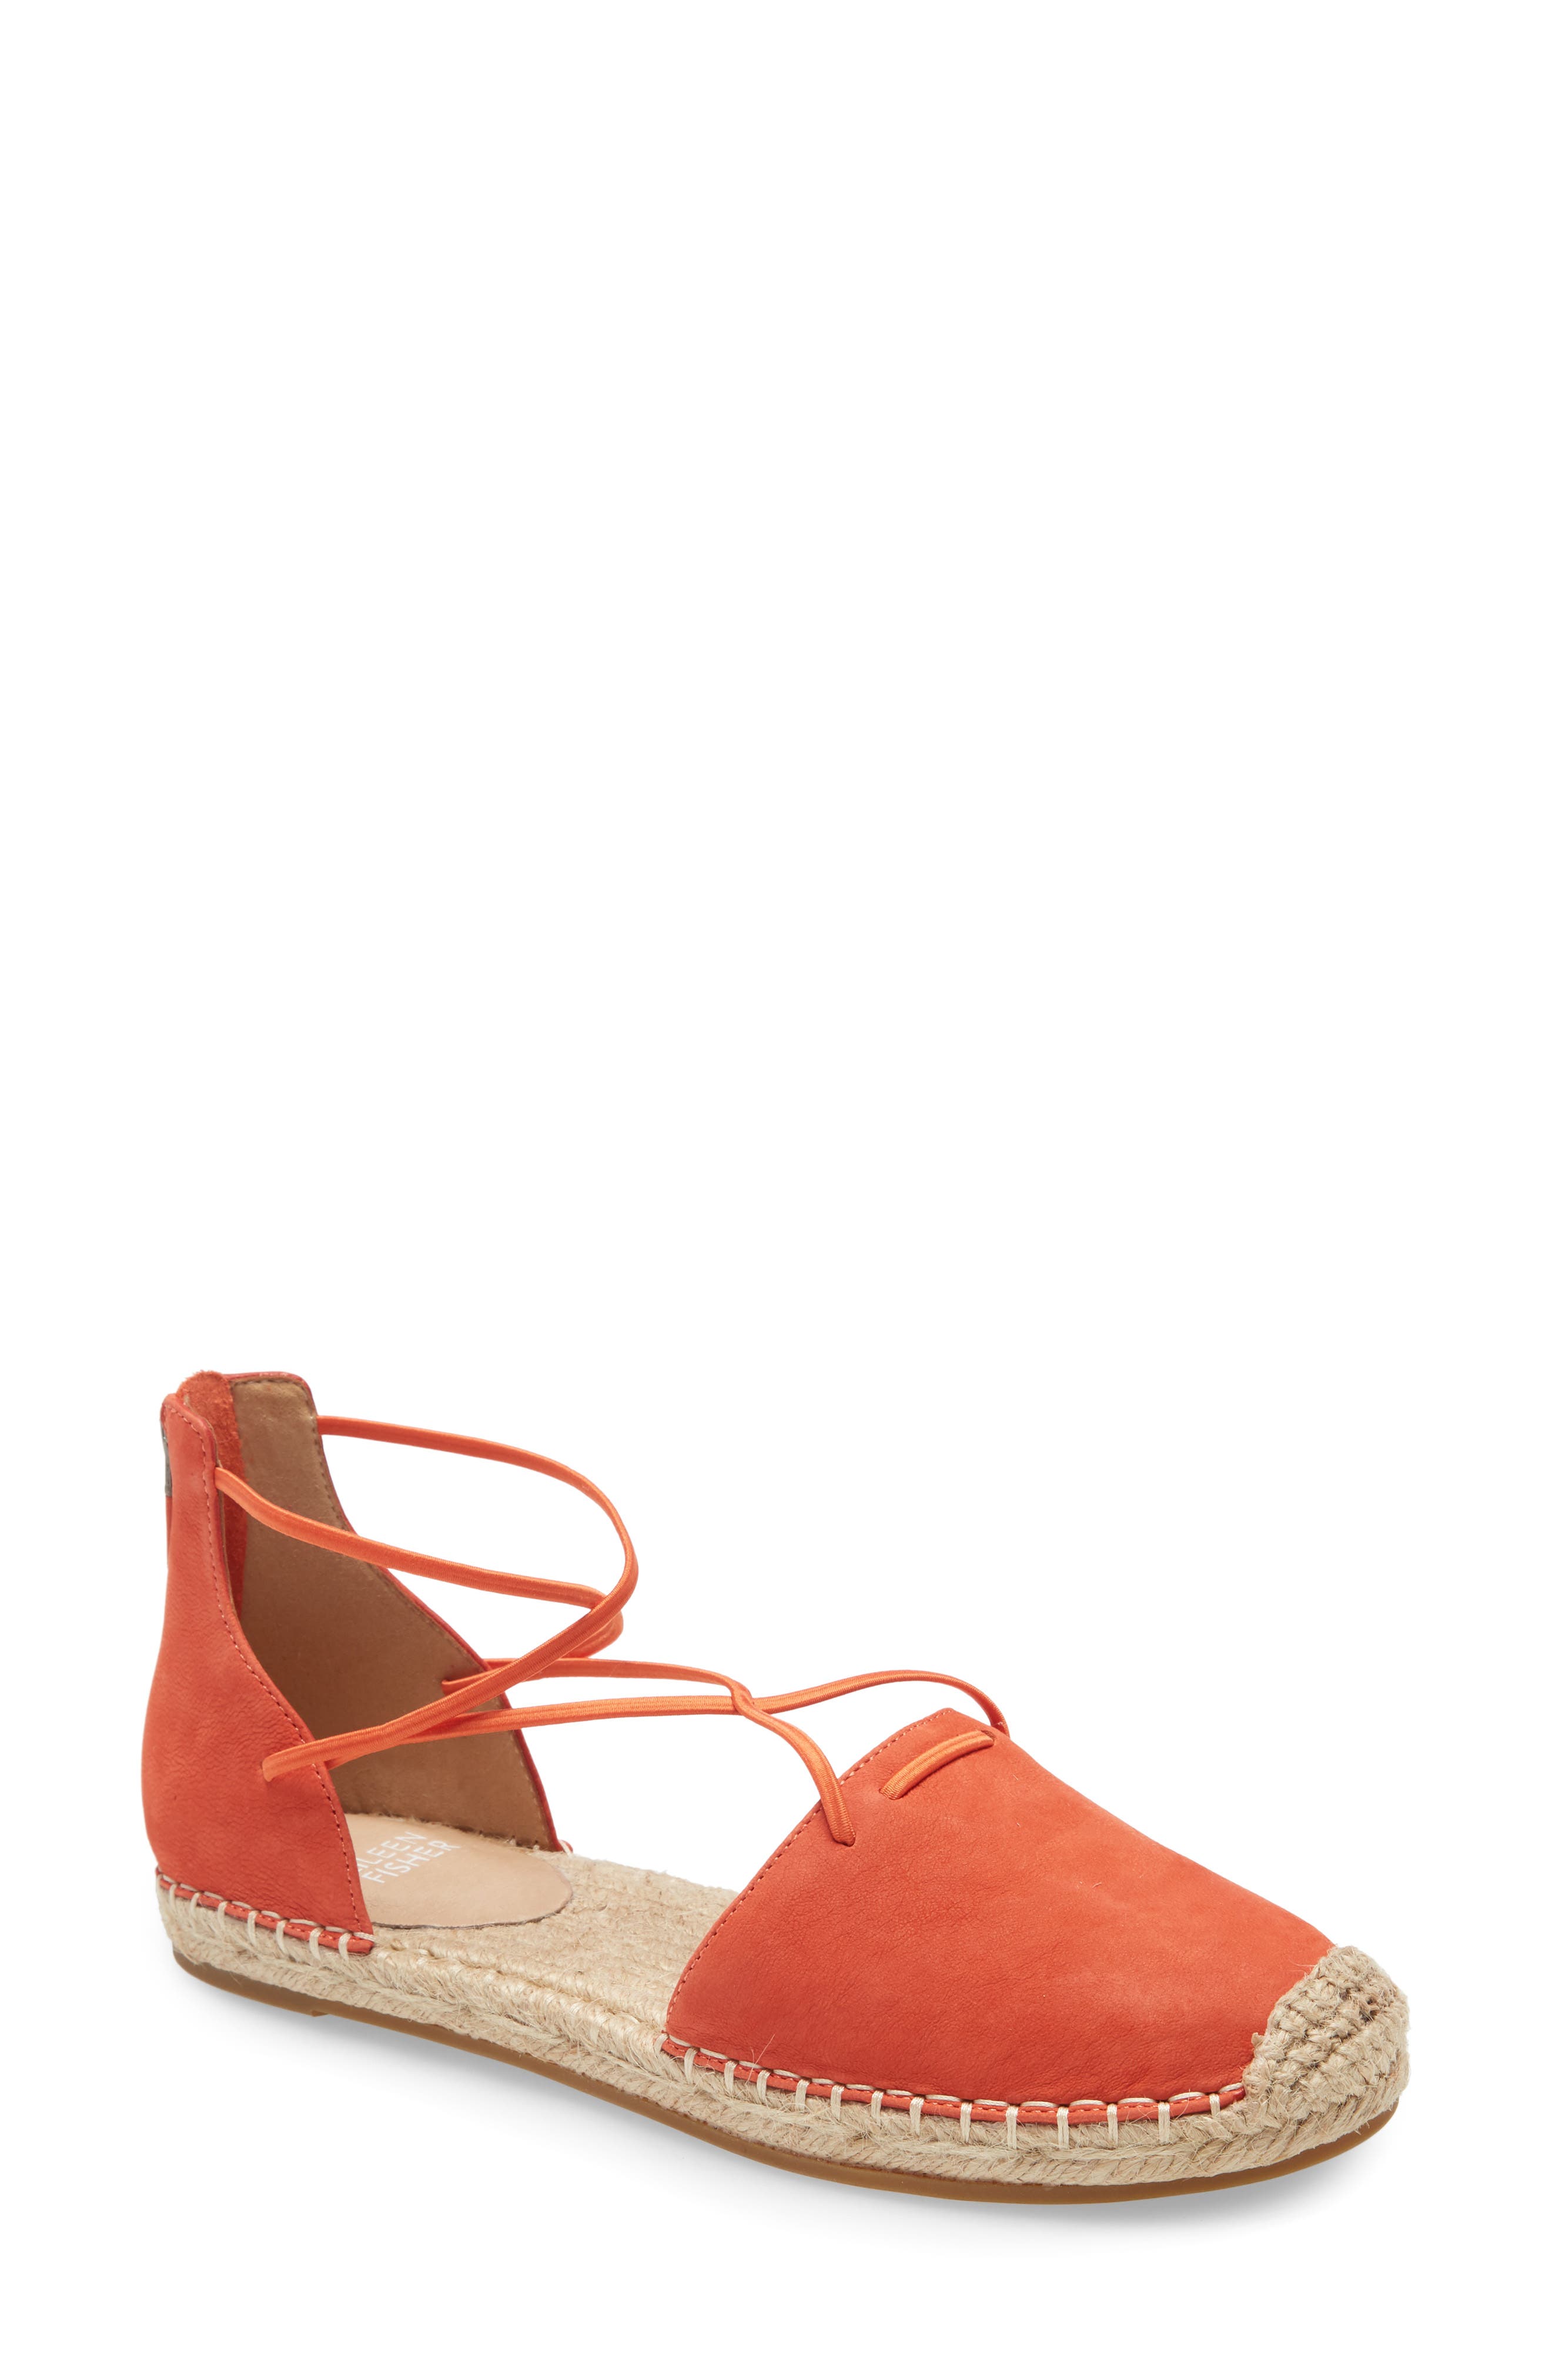 eileen fisher shoes sale nordstrom